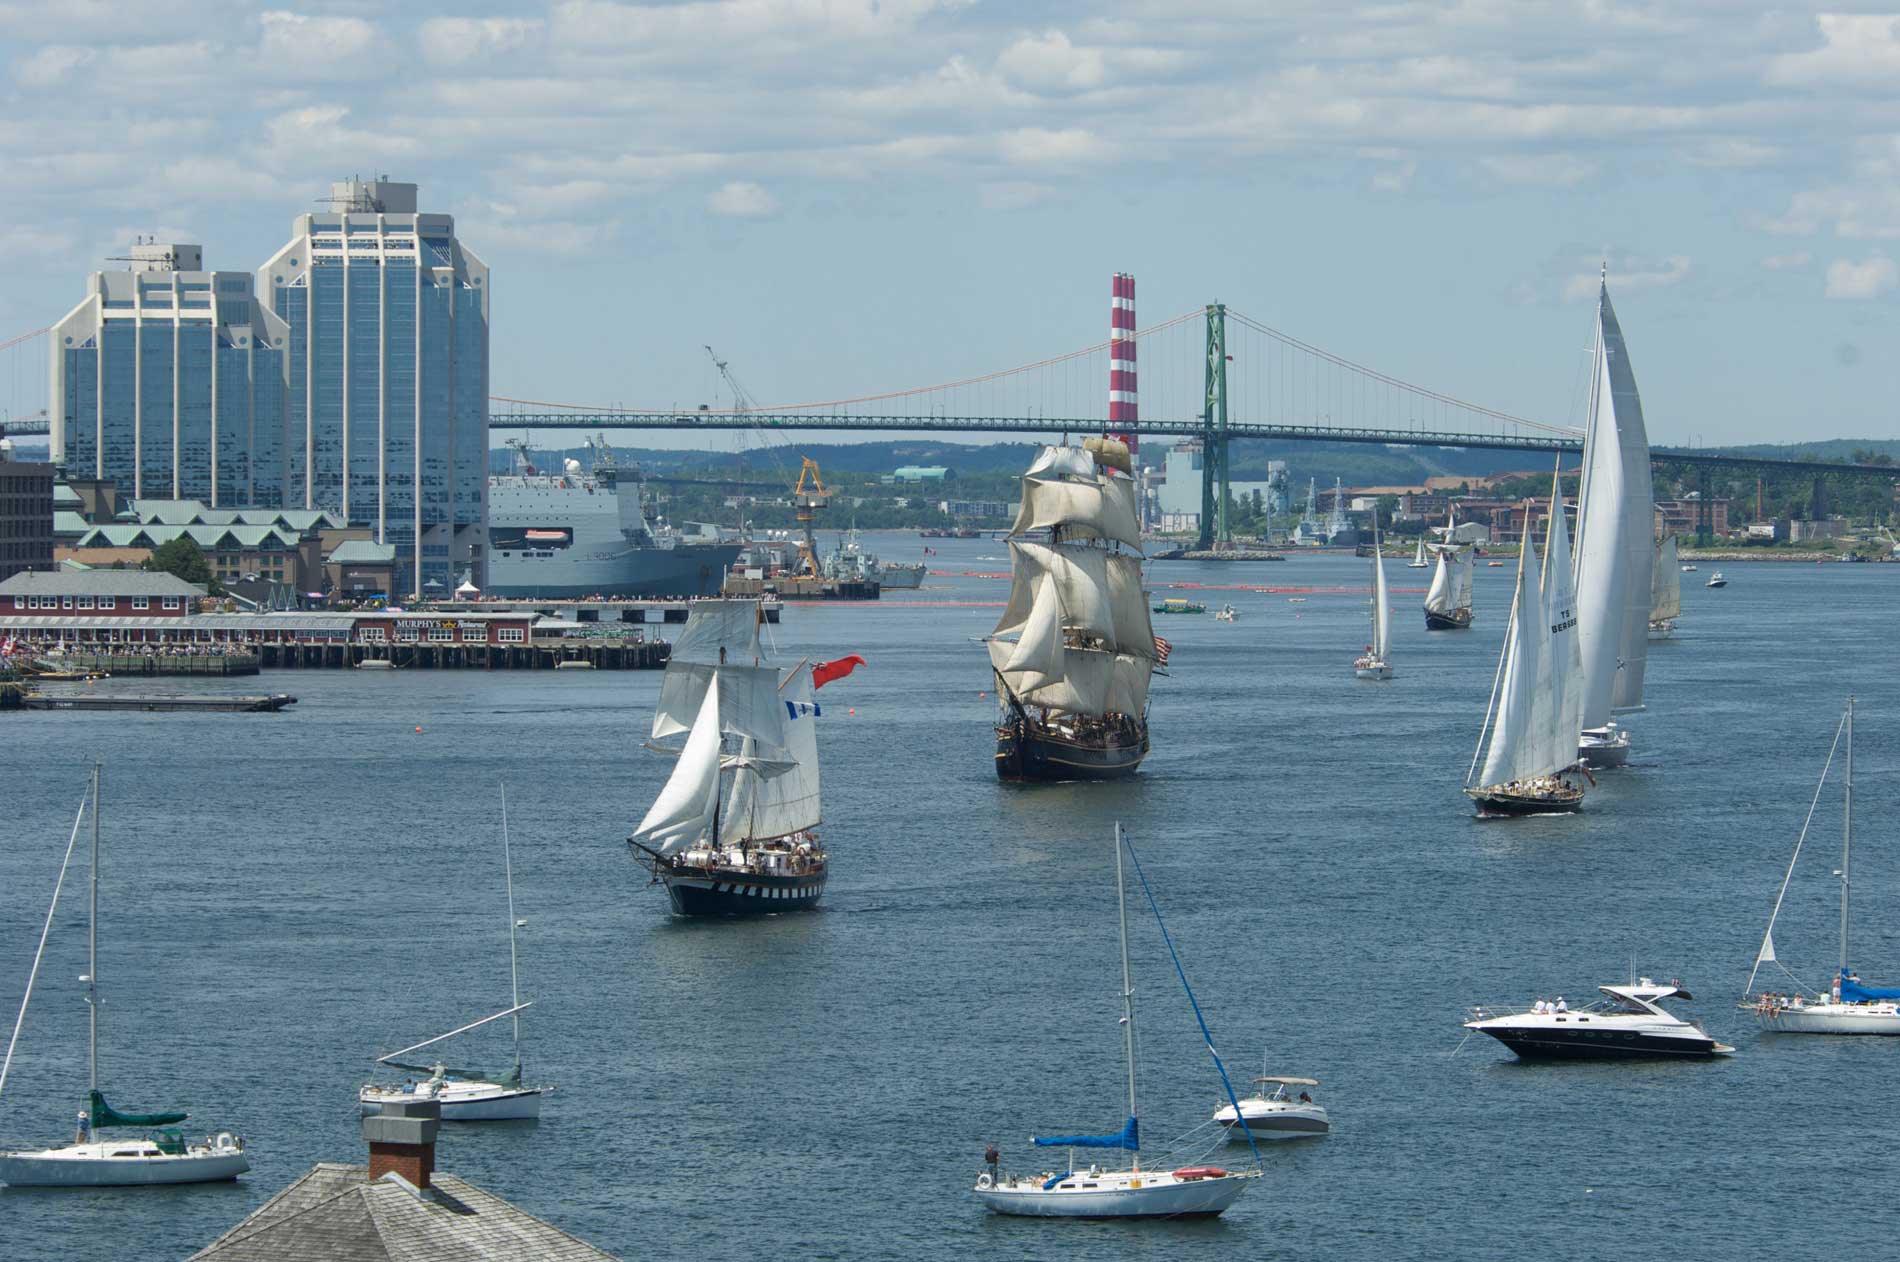 Tall ships are returning to Nova Scotia in 2012!